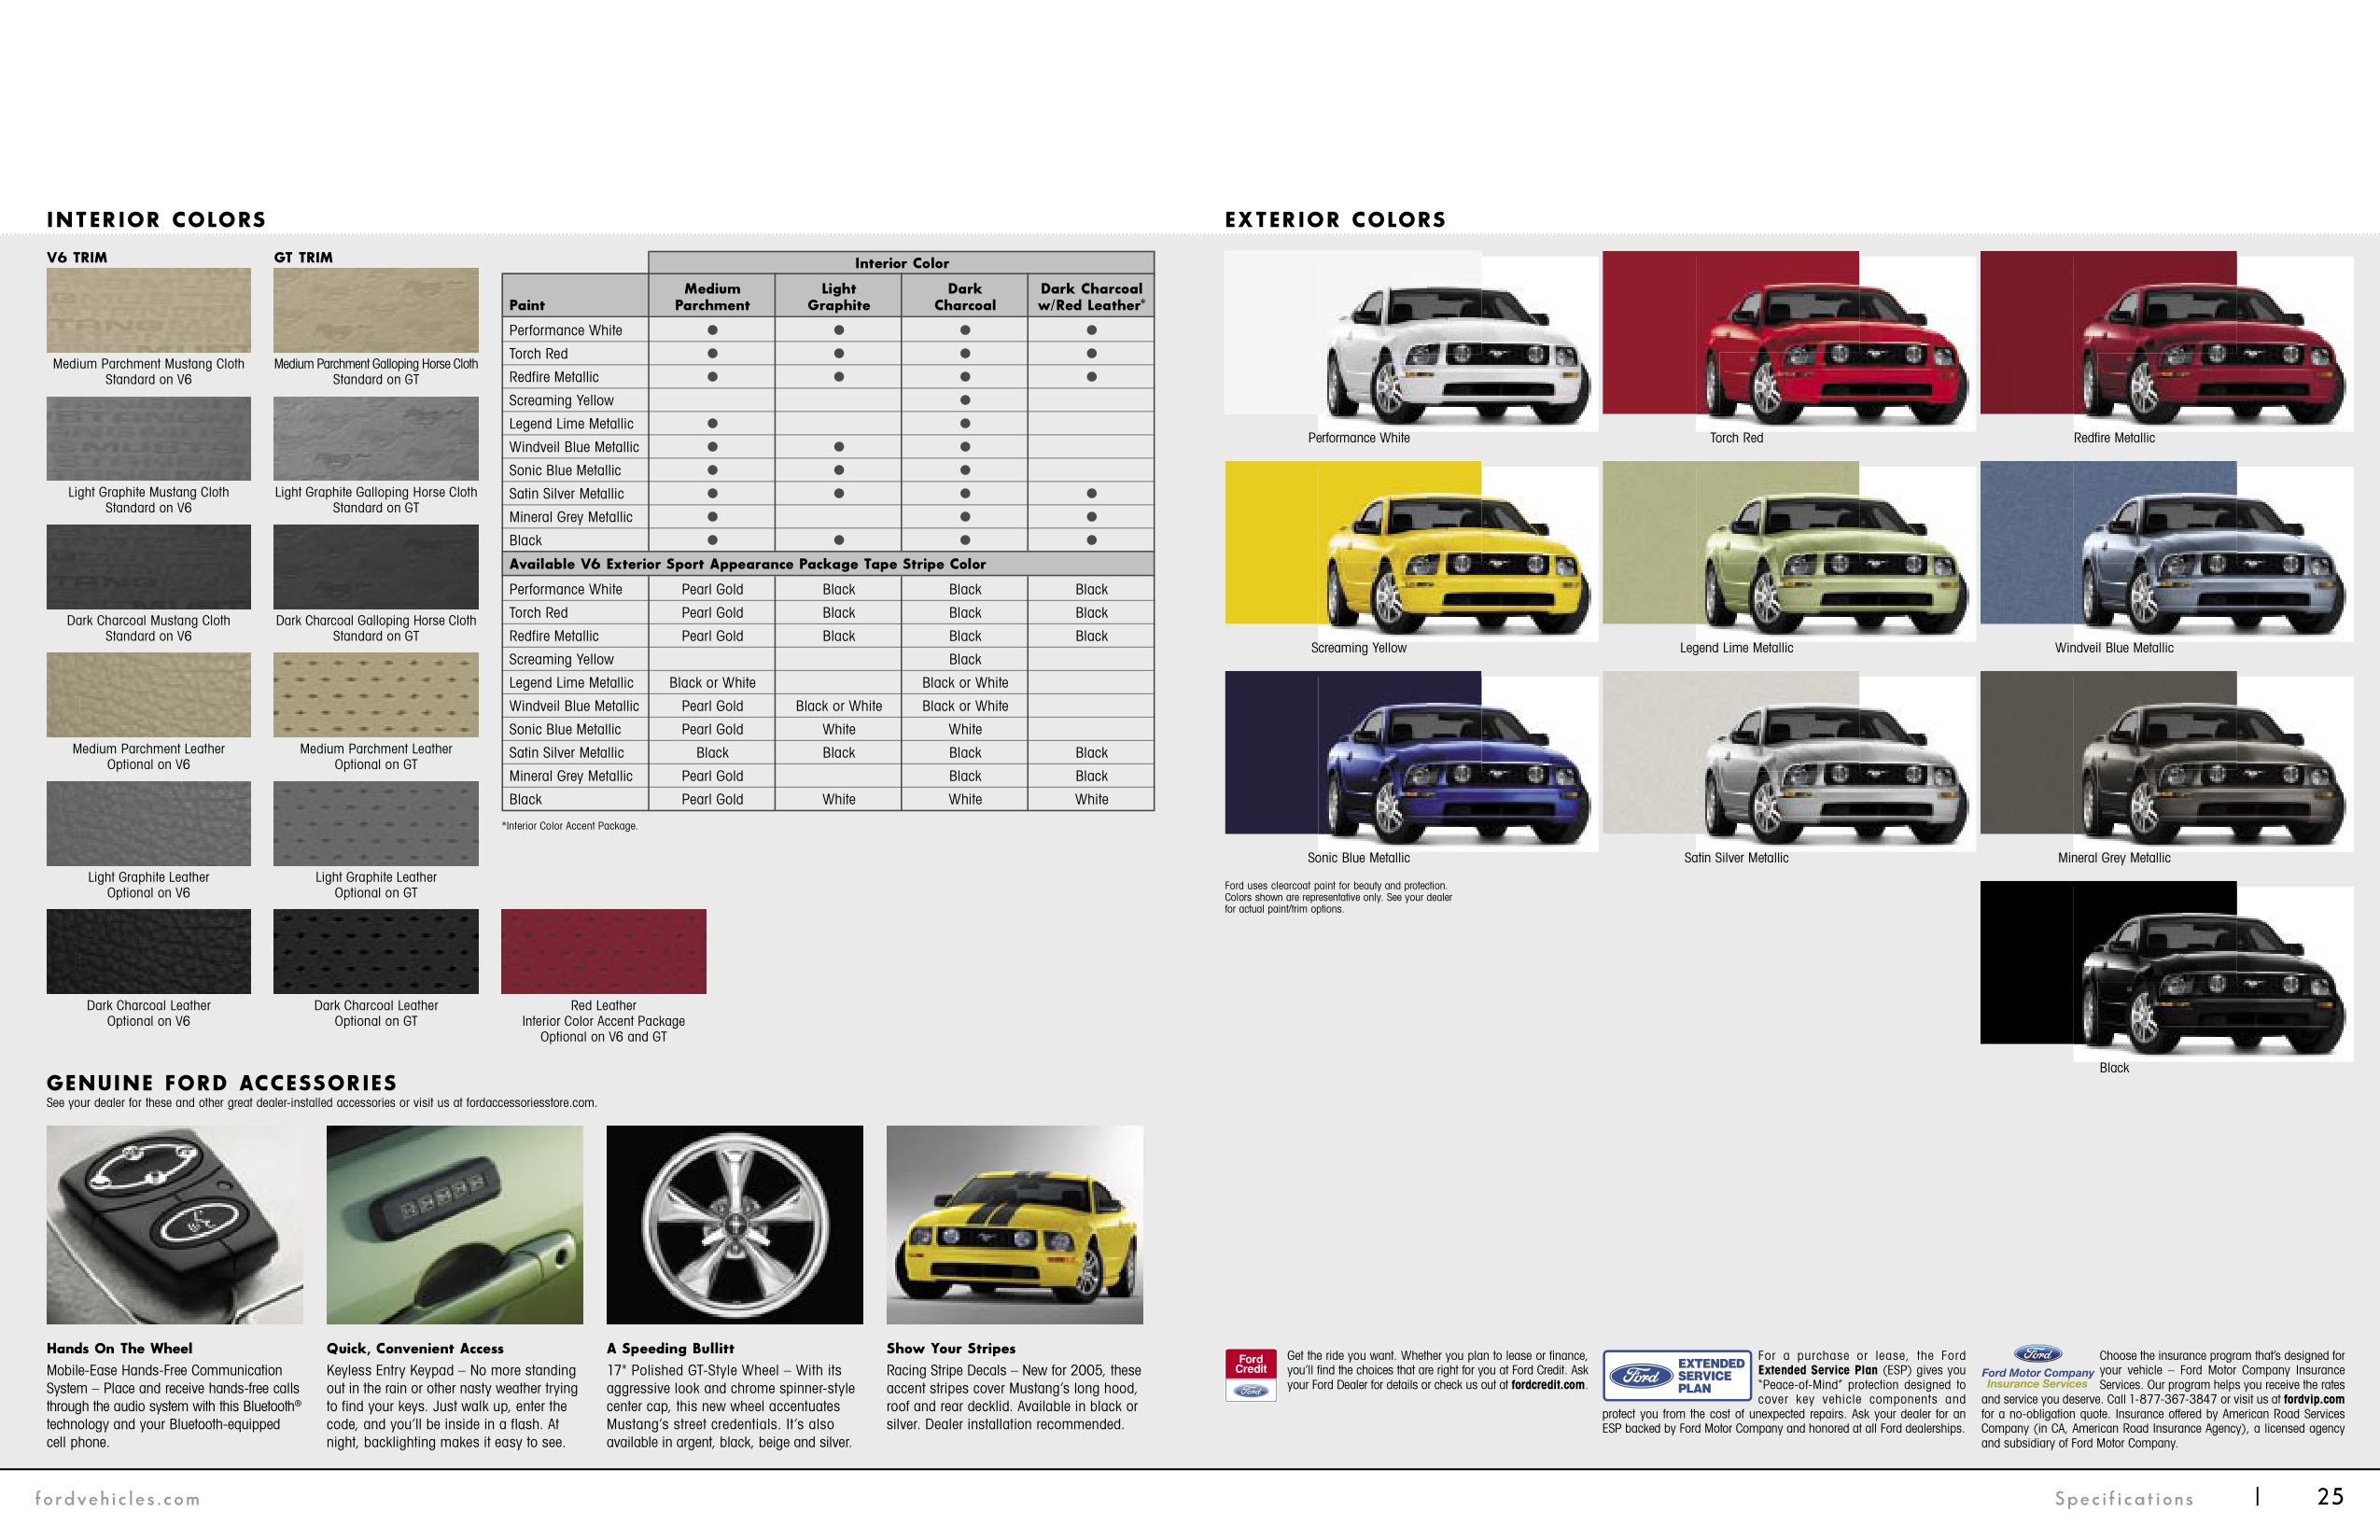 2005 Ford Mustang Brochure Page 6